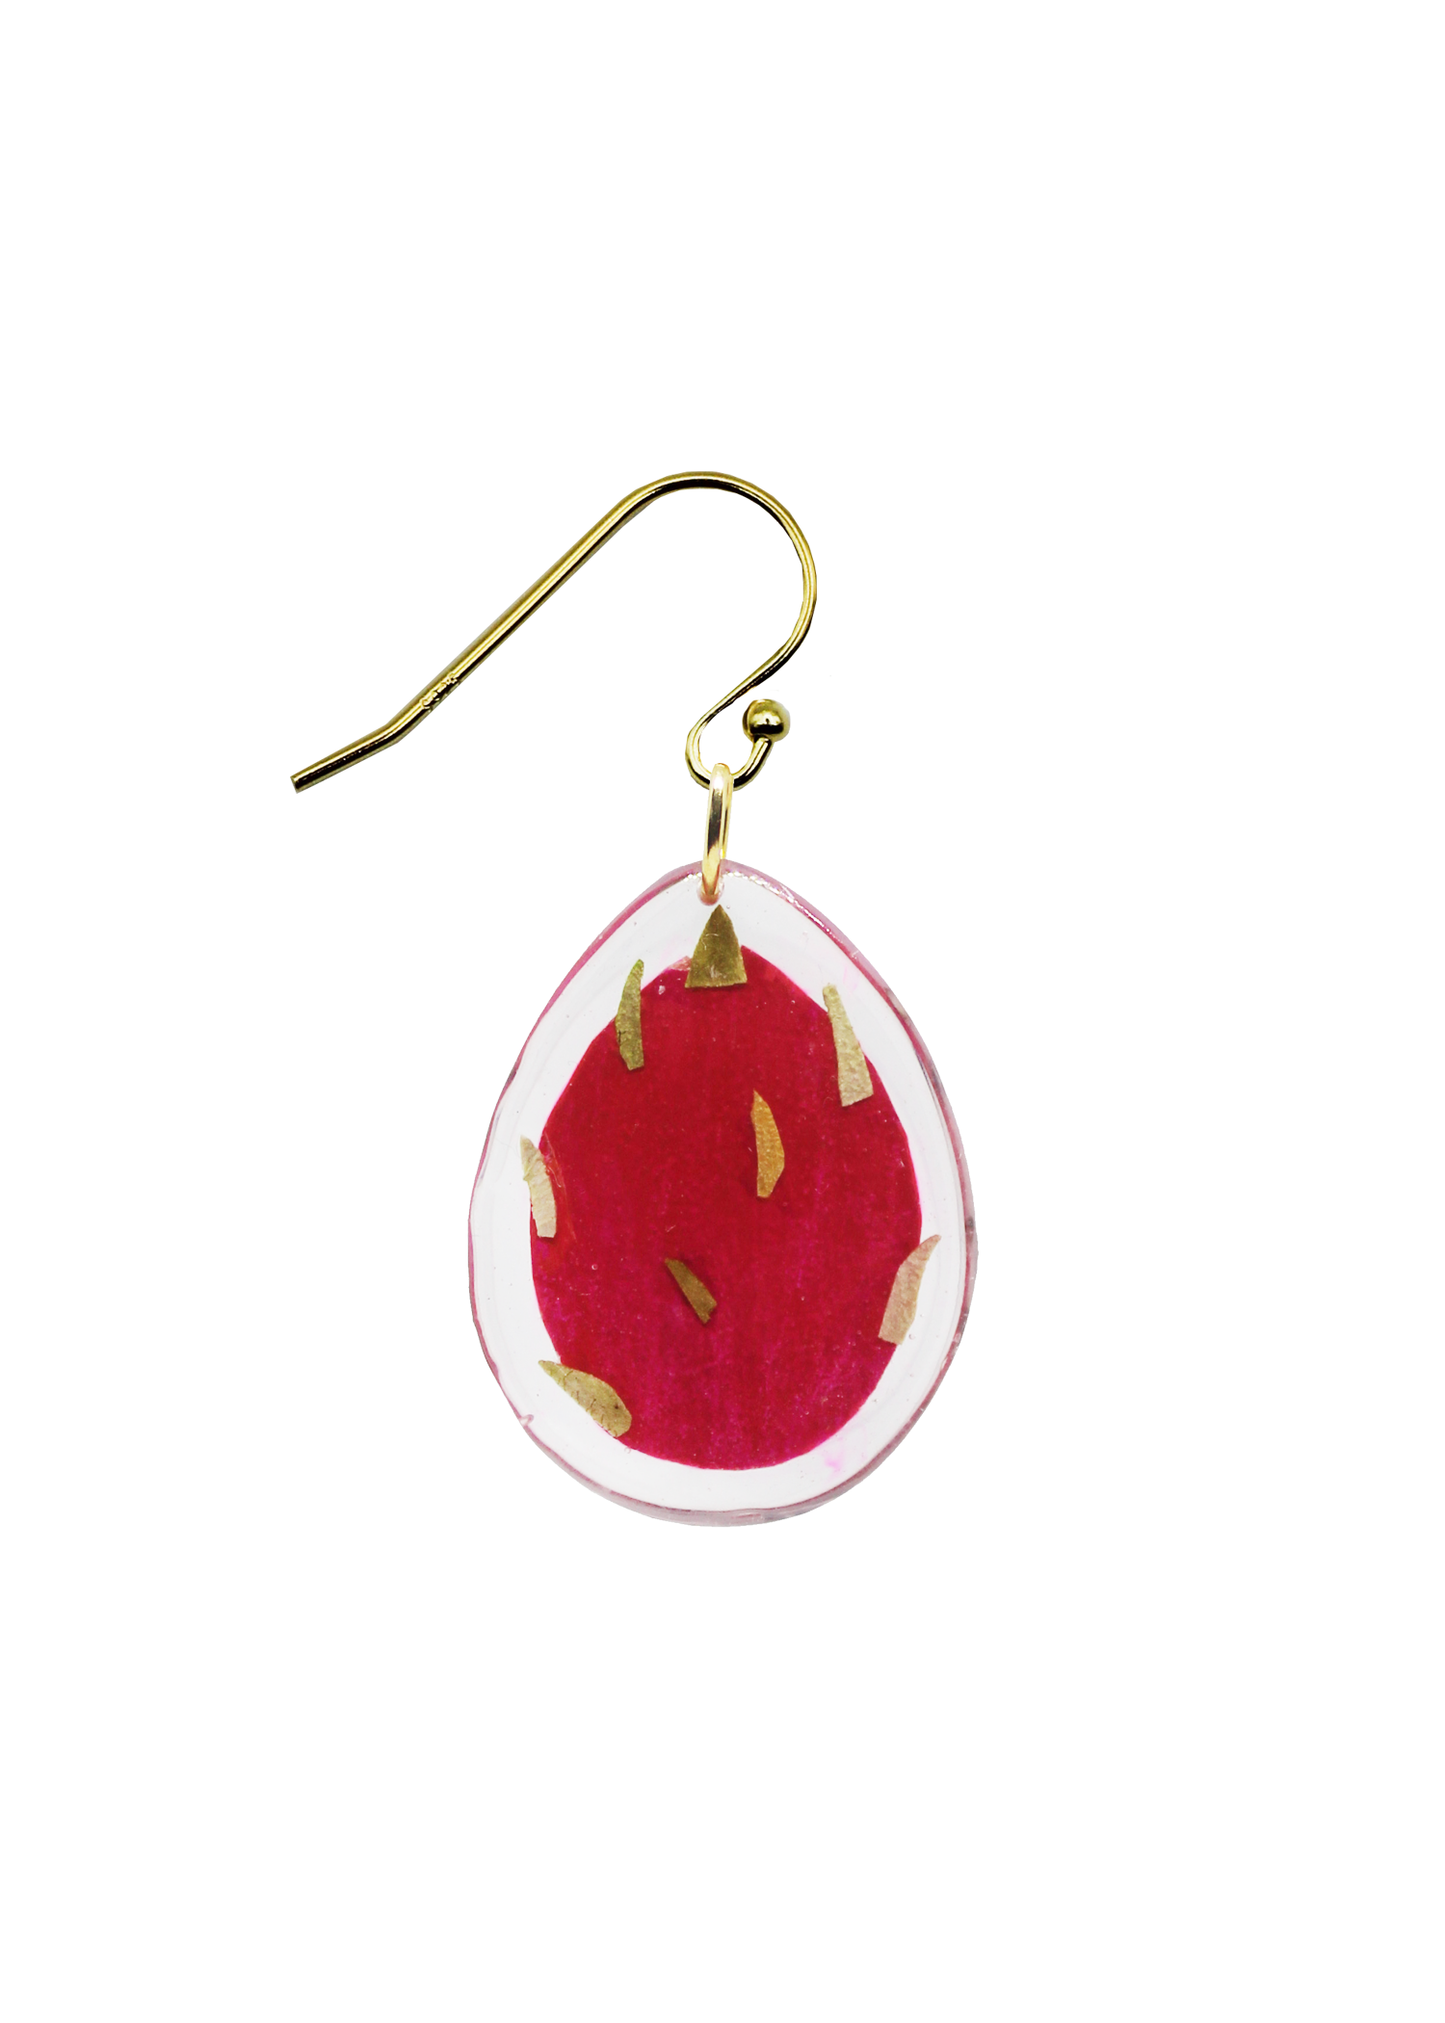 Resin Coated Back of Miniature Dragon Fruit with gold spikes on a French Hook Earring